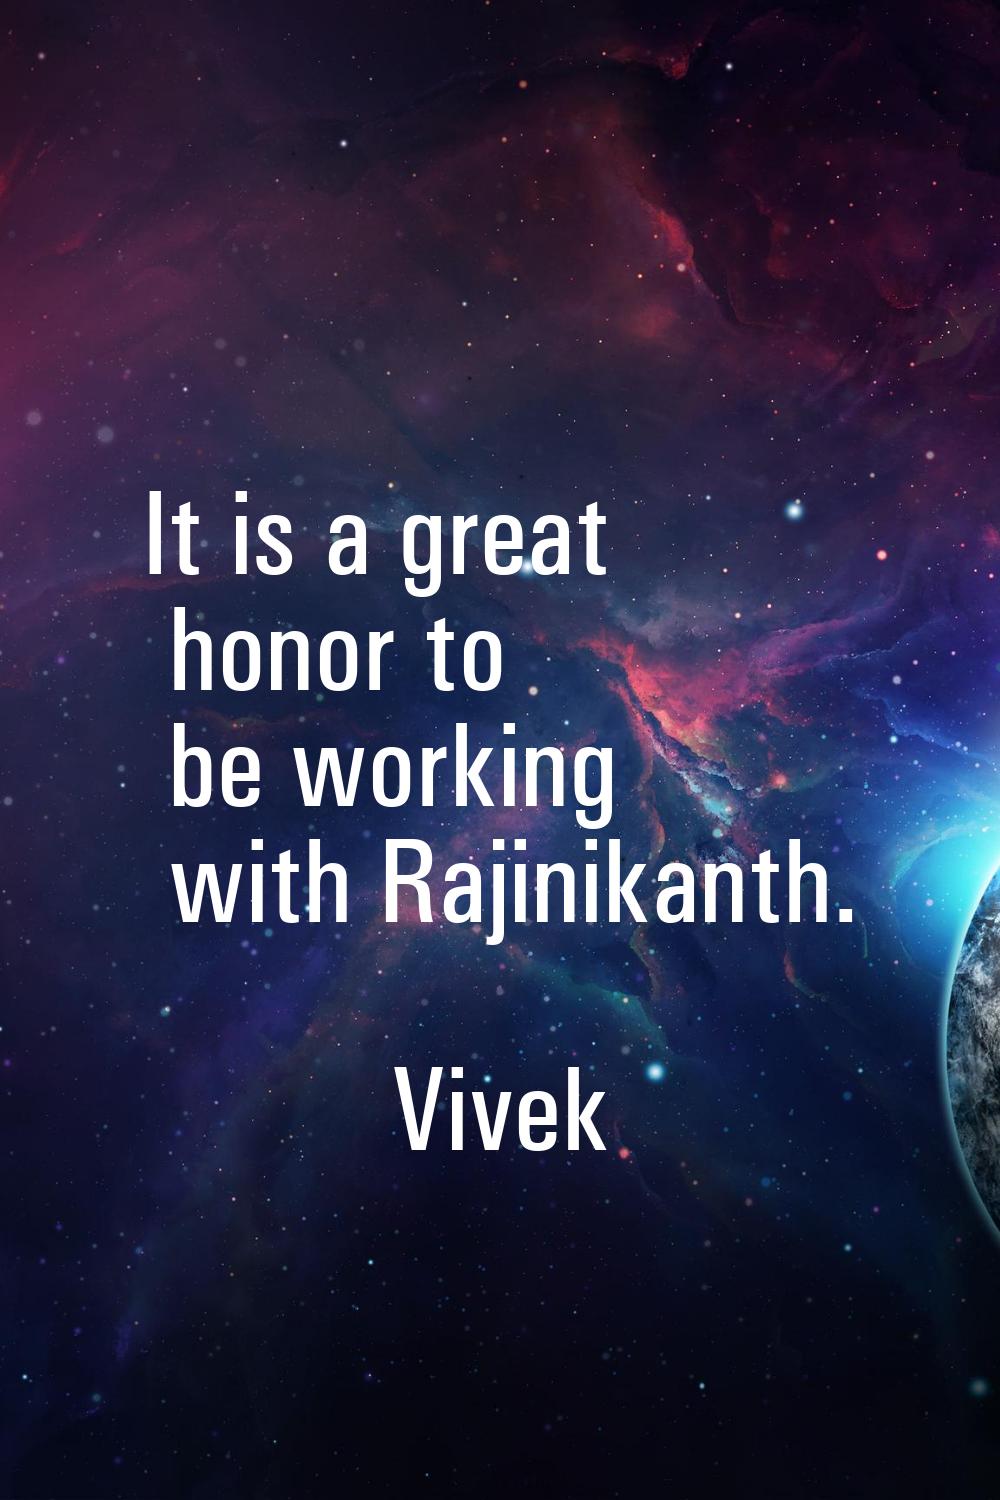 It is a great honor to be working with Rajinikanth.